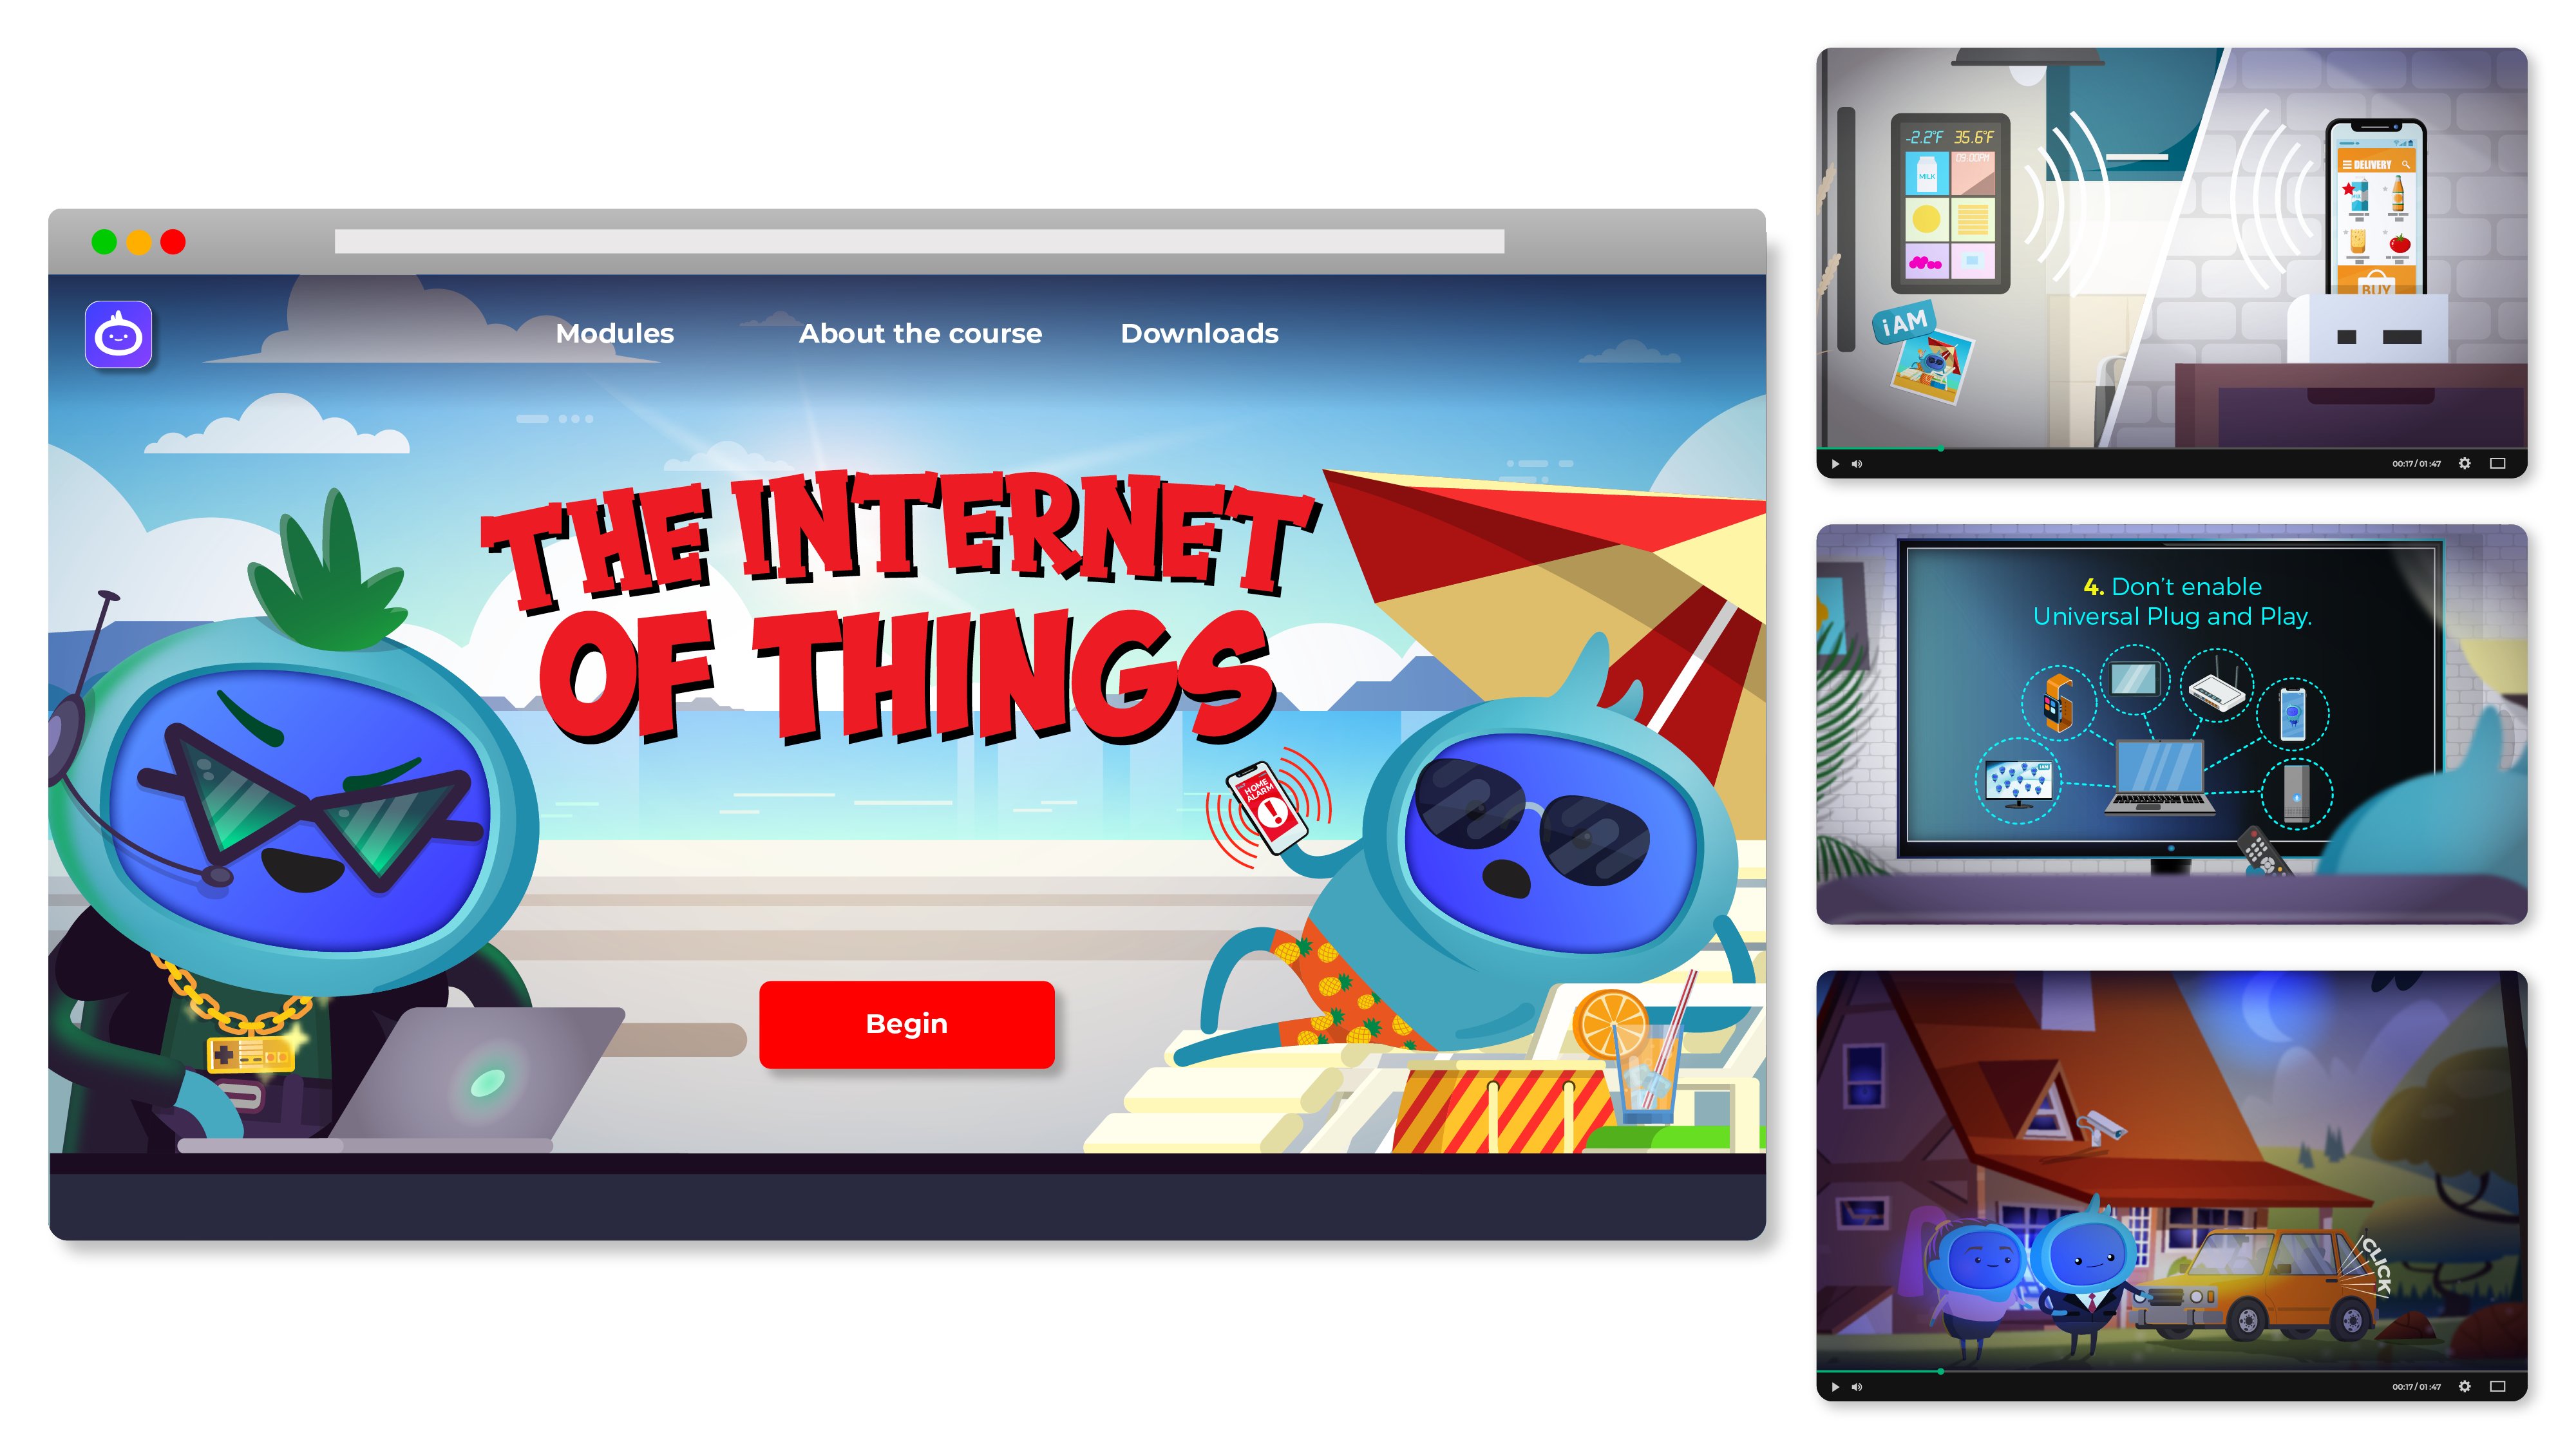 iAM The Internet of Things Landing Page Image